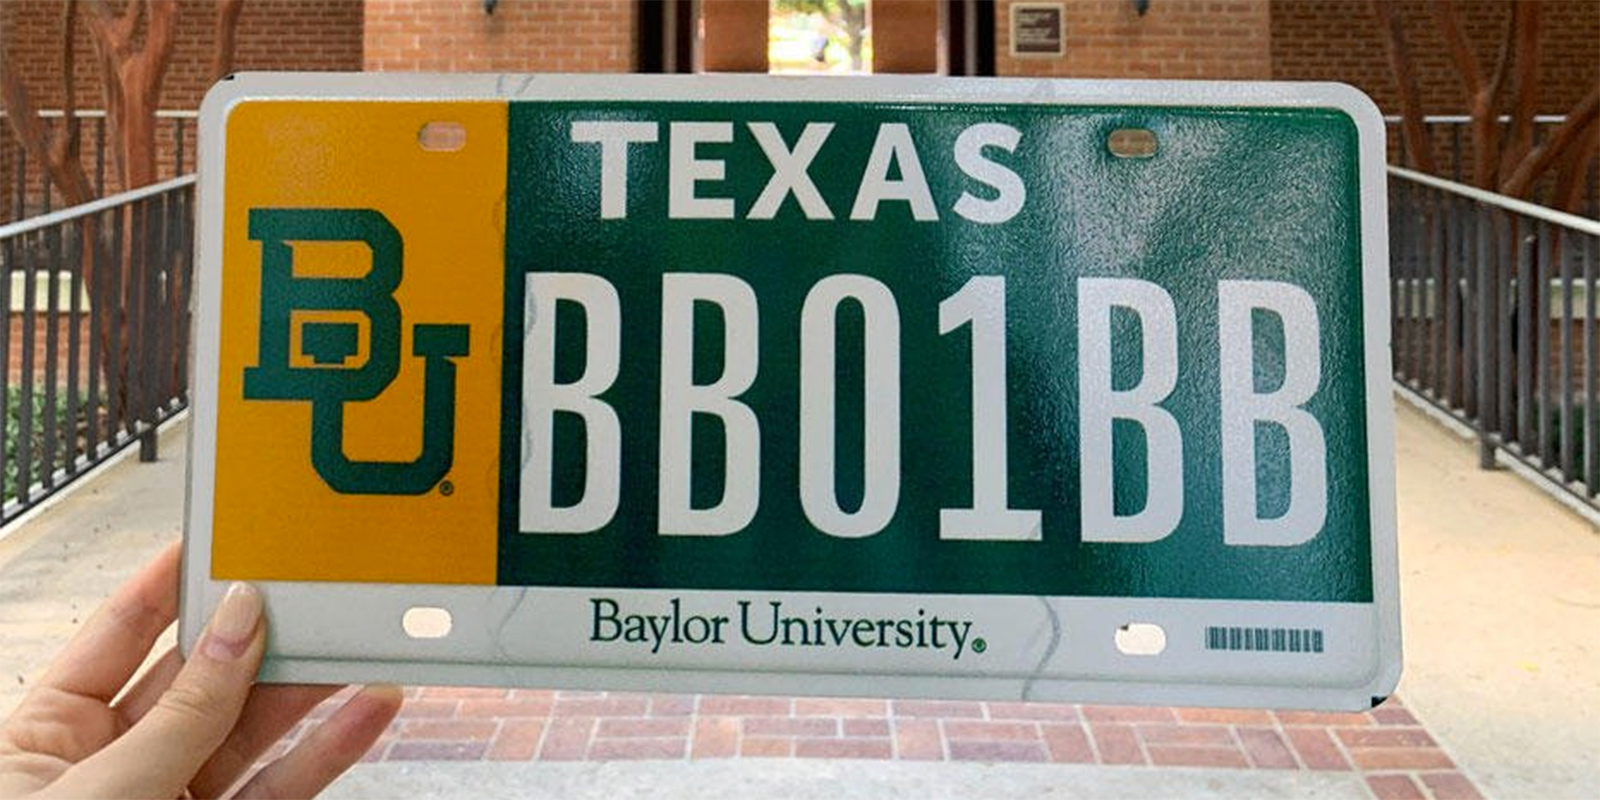 New Baylor license plate, displayed outside Old Main